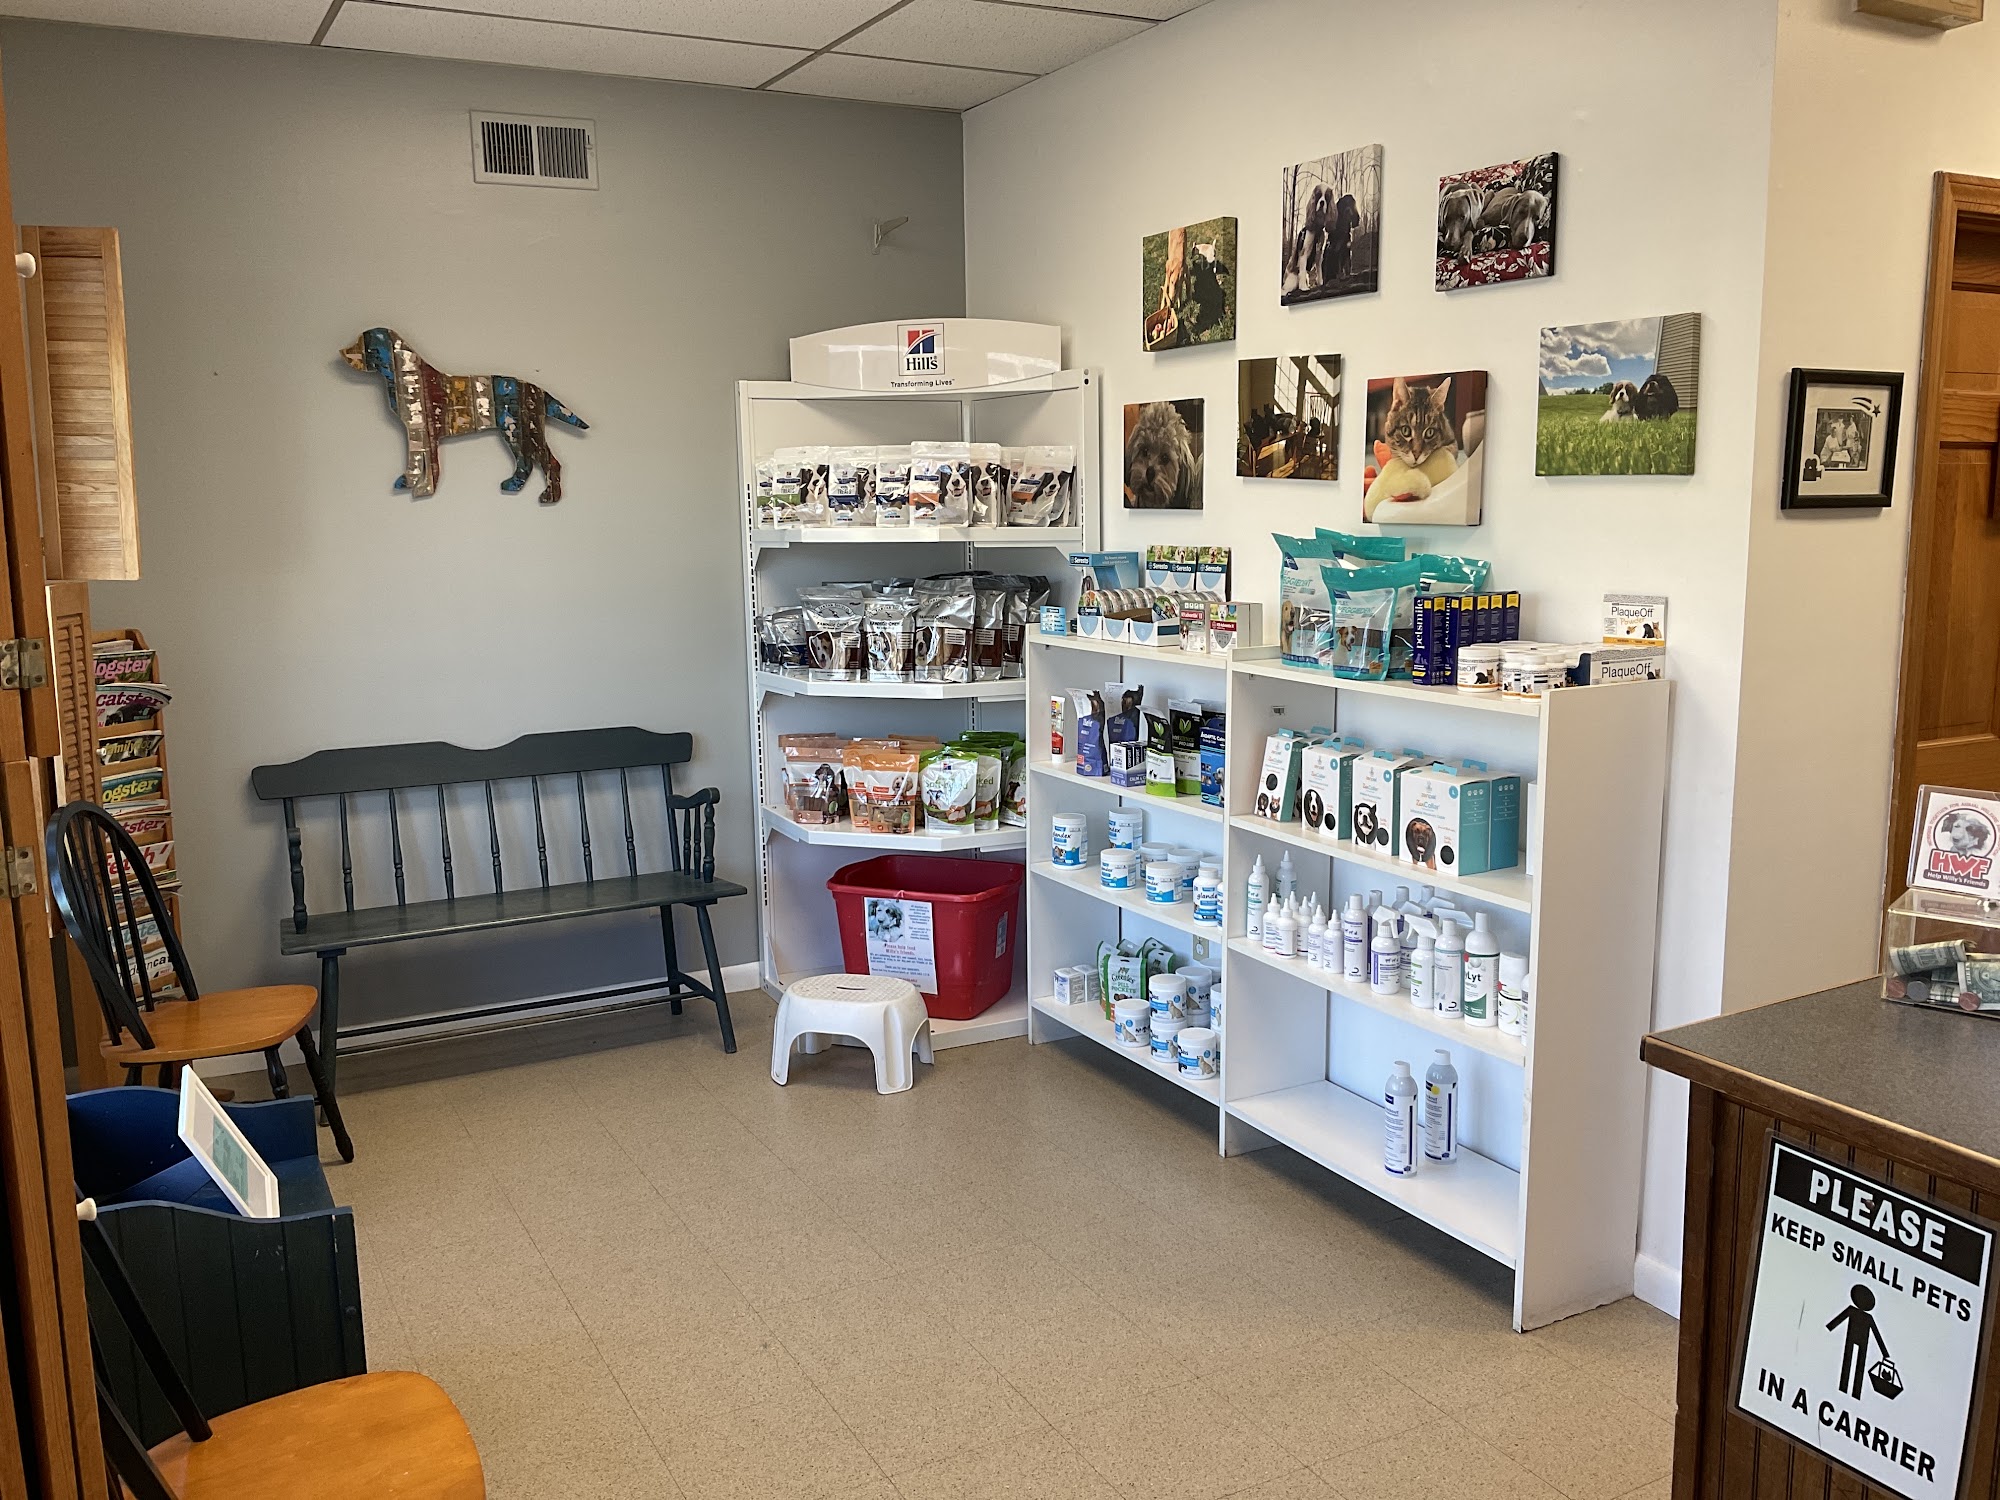 Northford Veterinary Clinic 1411 Middletown Ave, Northford Connecticut 06472